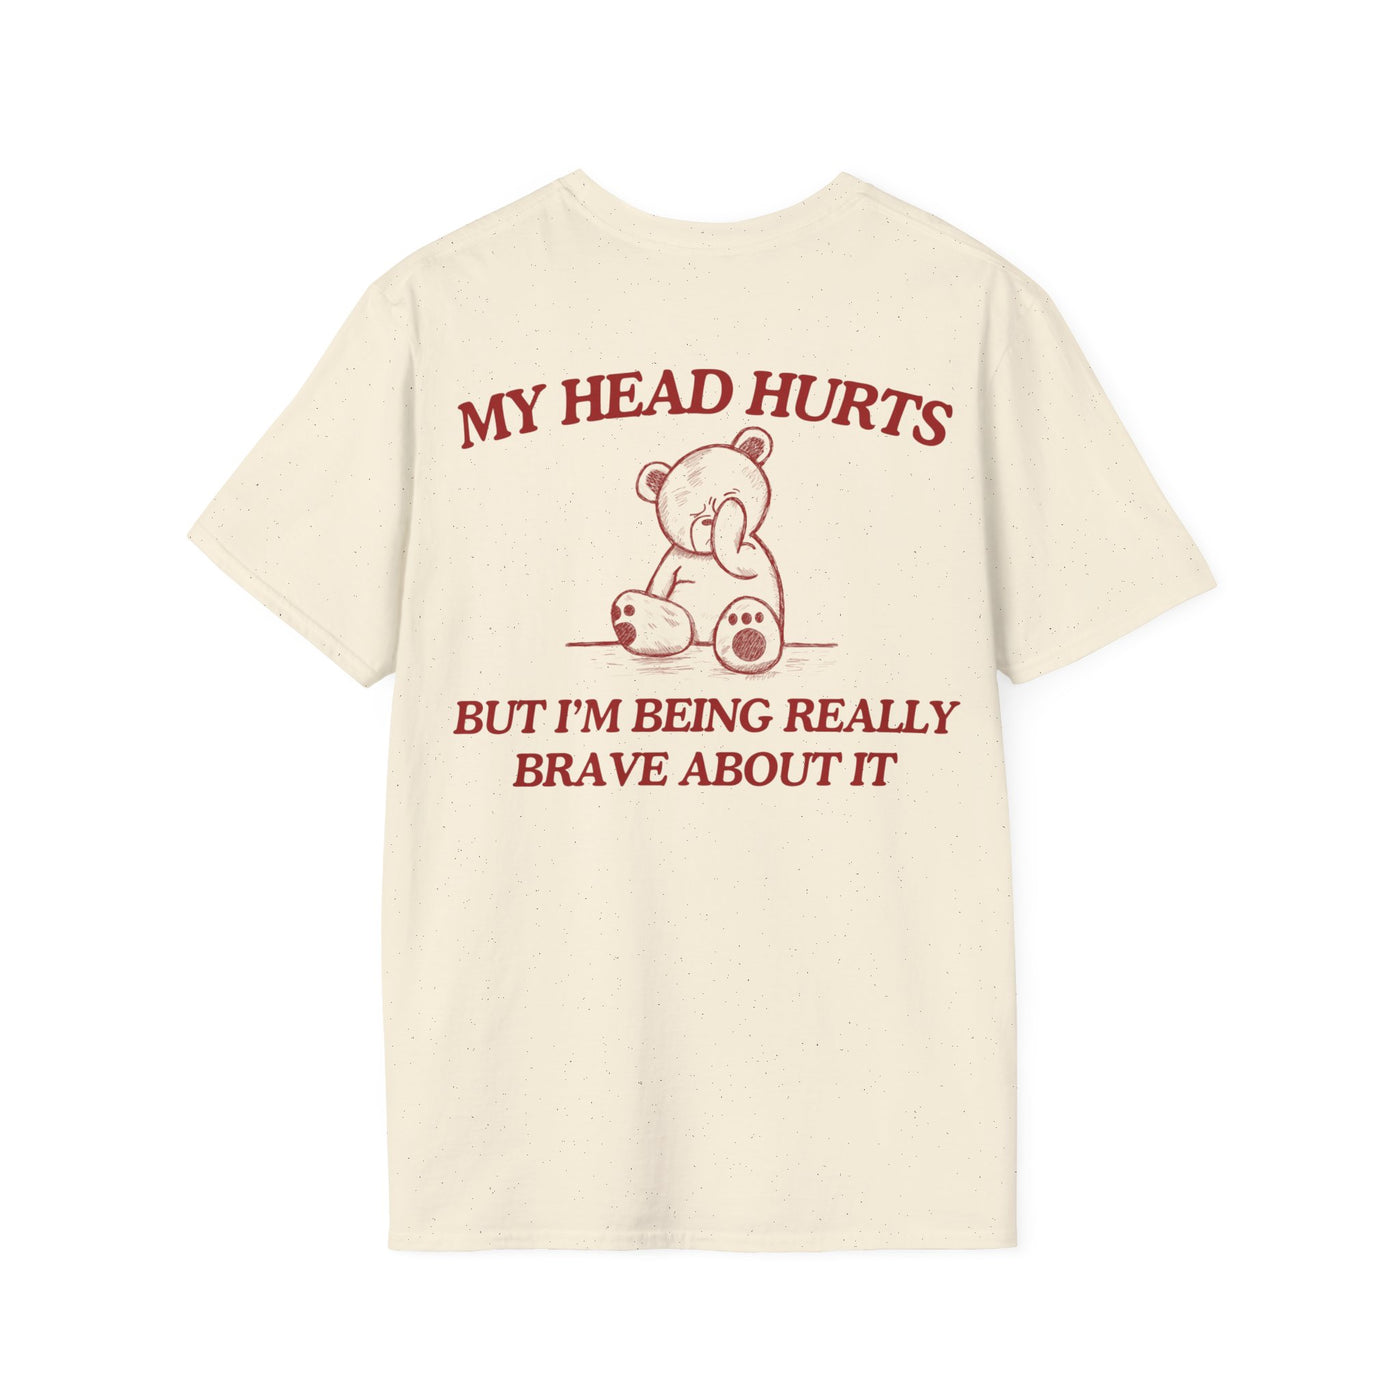 My Head Hurts (BACK DESIGN ONLY)